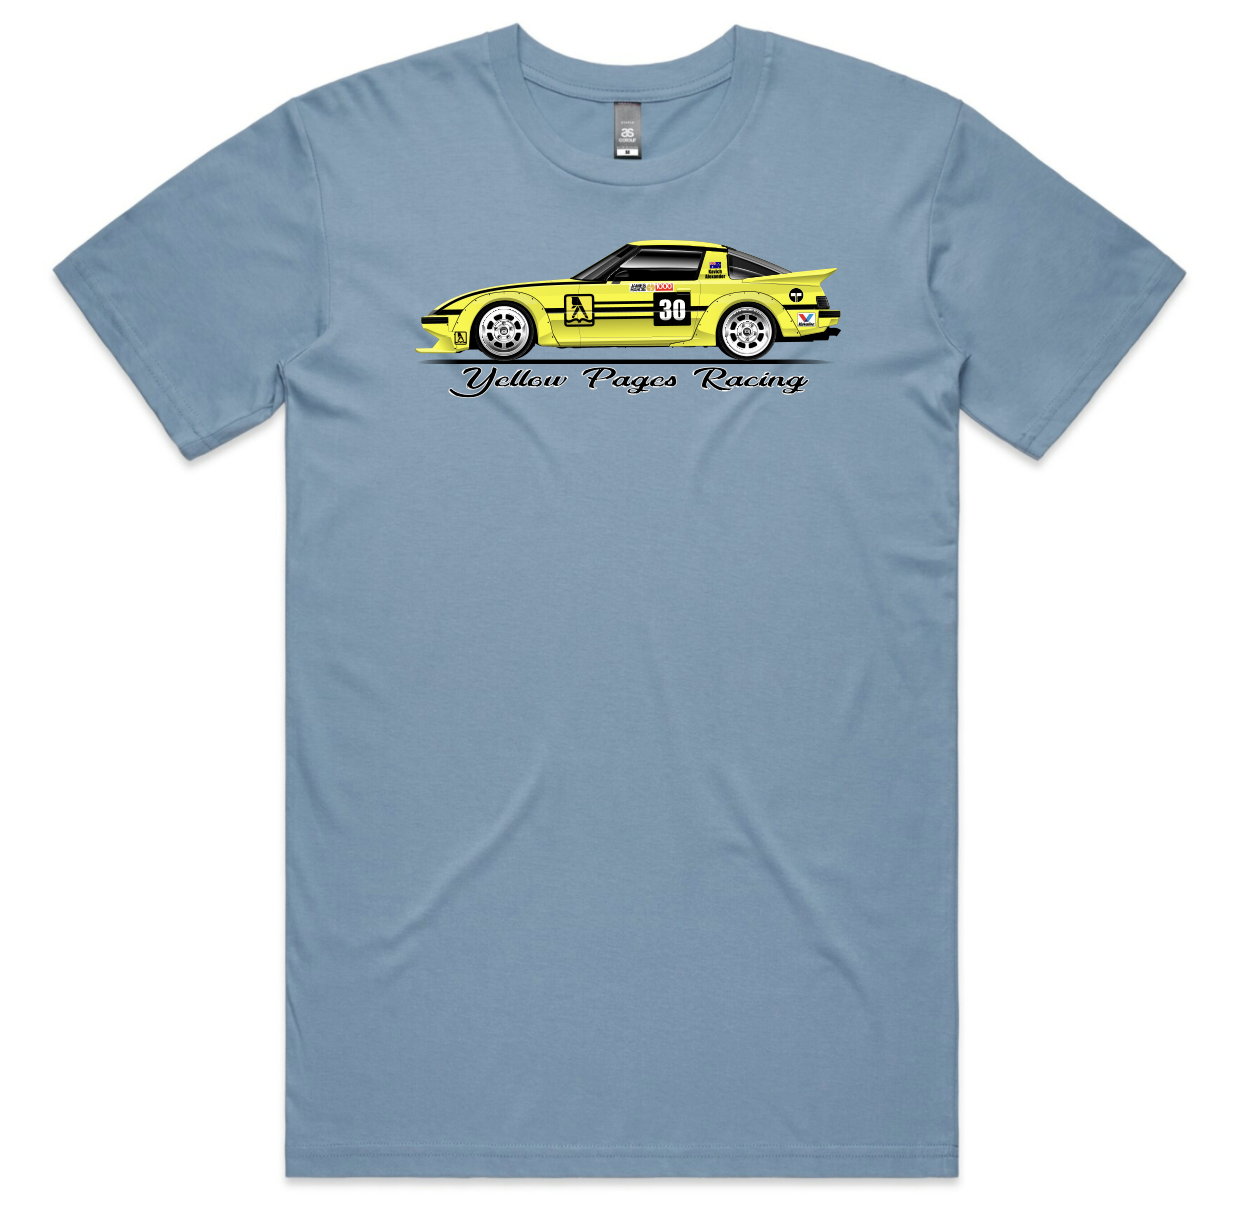 Yellow Pages Group C RX7 - Mens